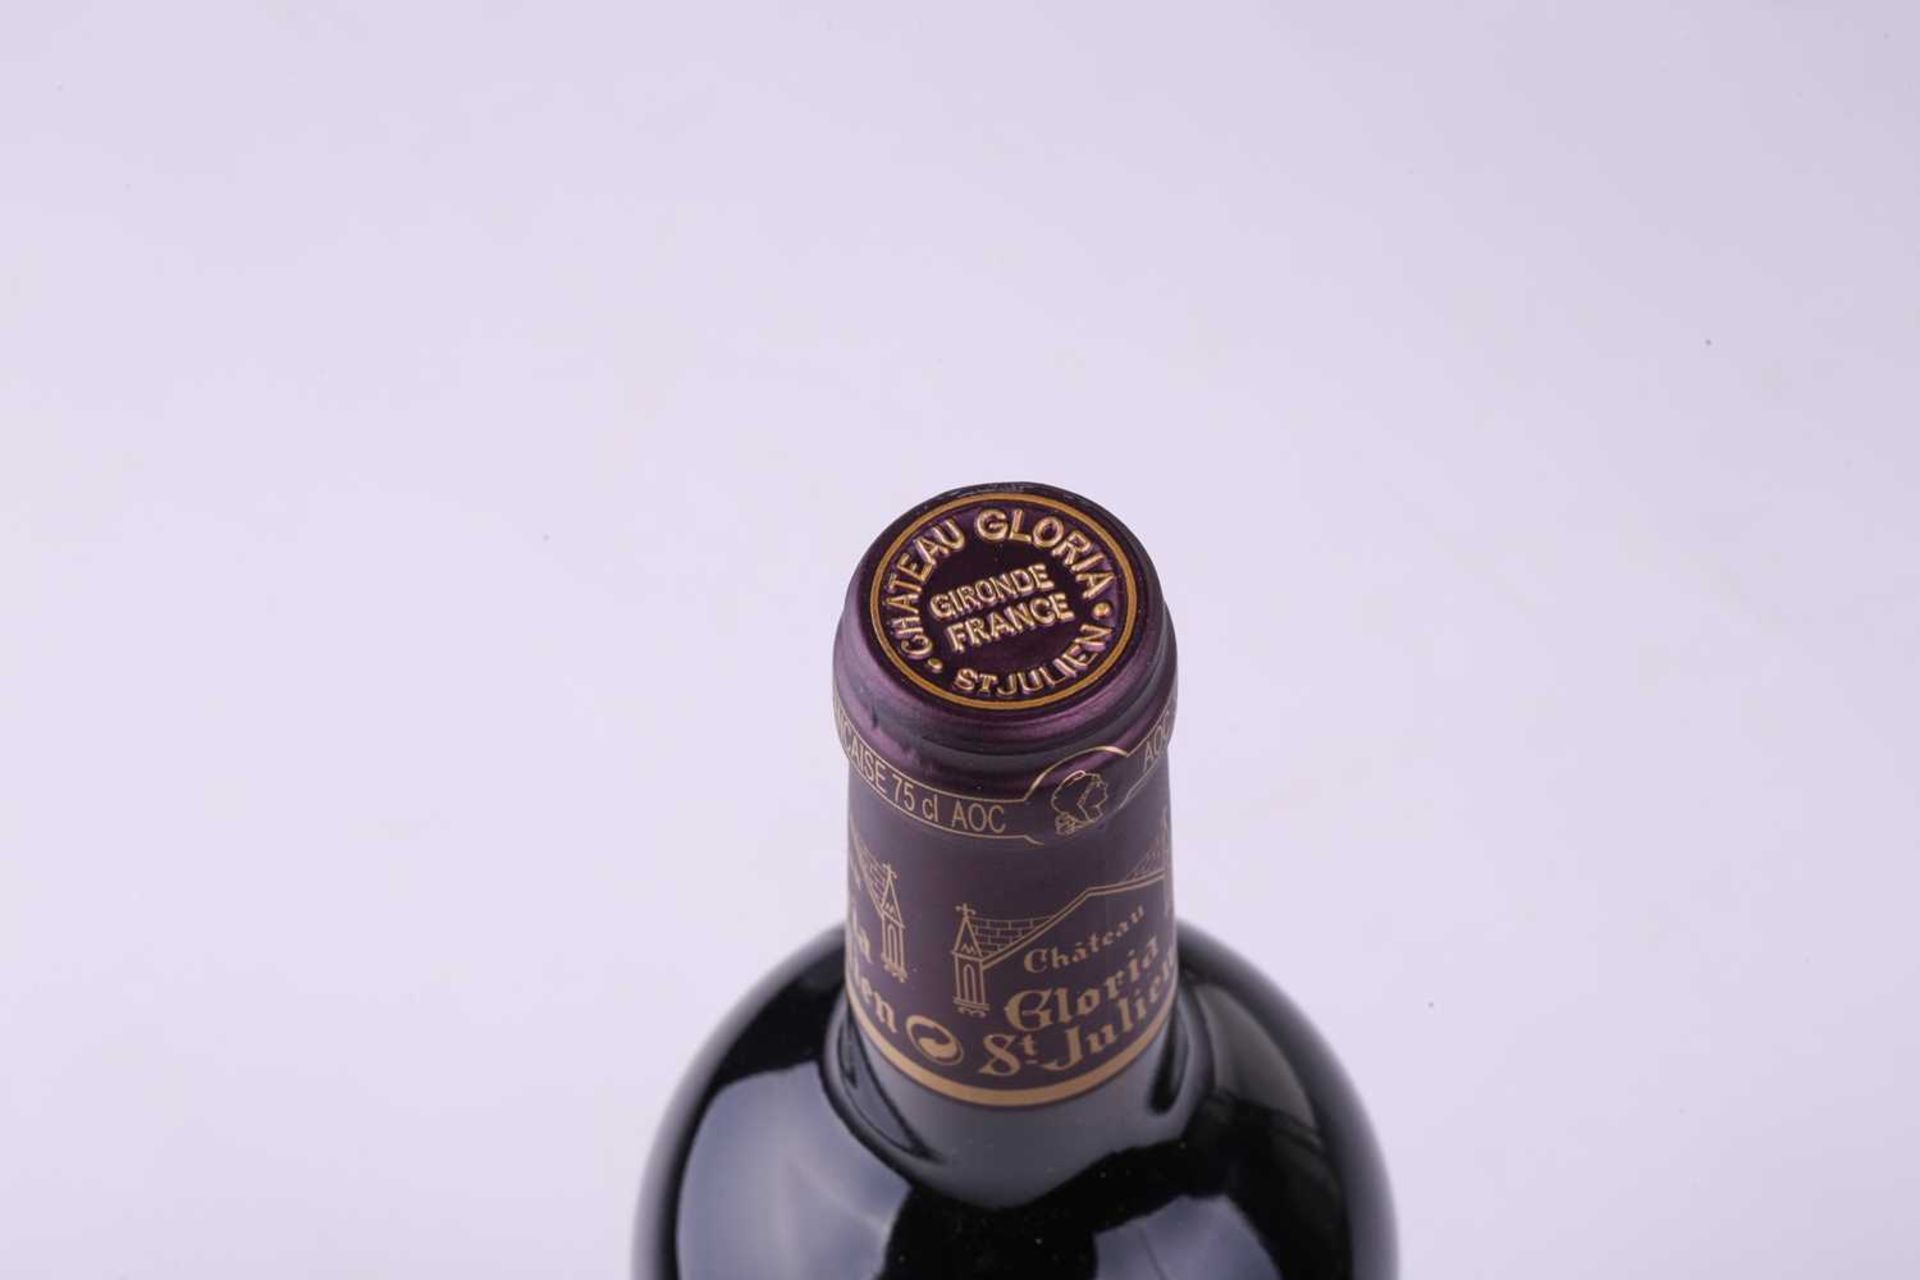 Six bottles of Chateau Gloria St Julien Bordeaux, 2011, OWCPrivate collector in London Unopened - Image 18 of 21